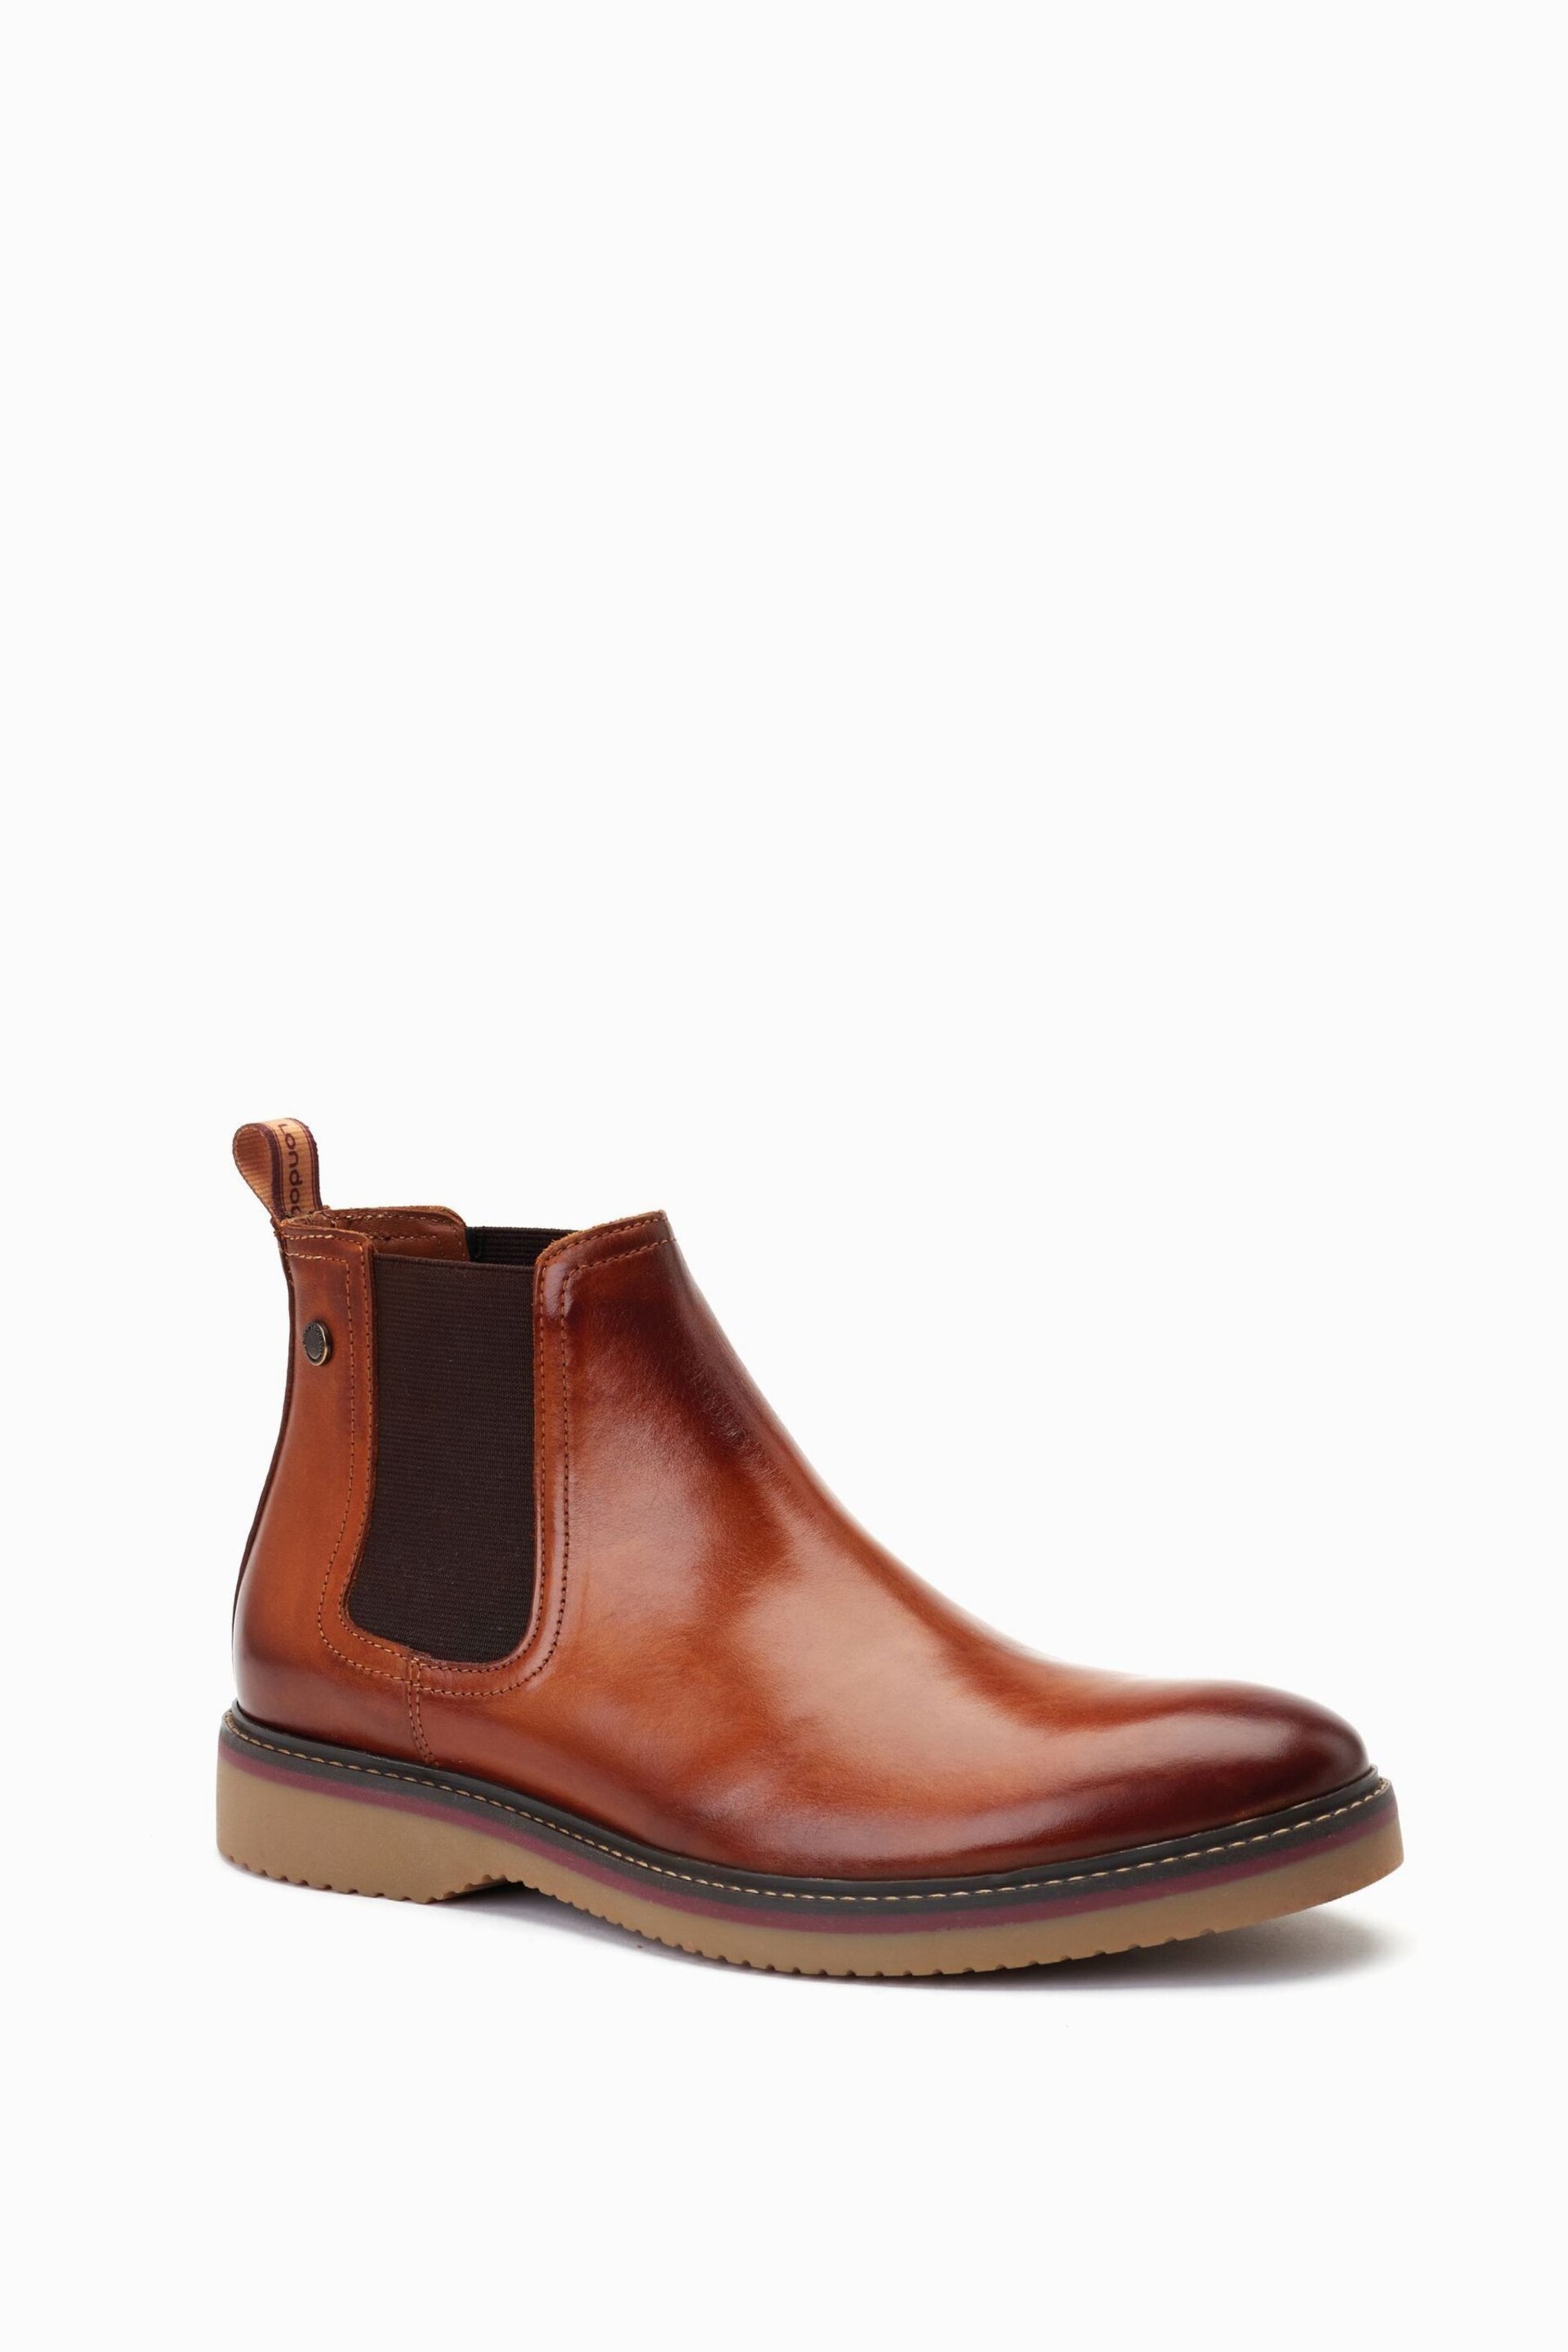 Base London Natural Hooper Pull On Chelsea Boots - Image 2 of 6